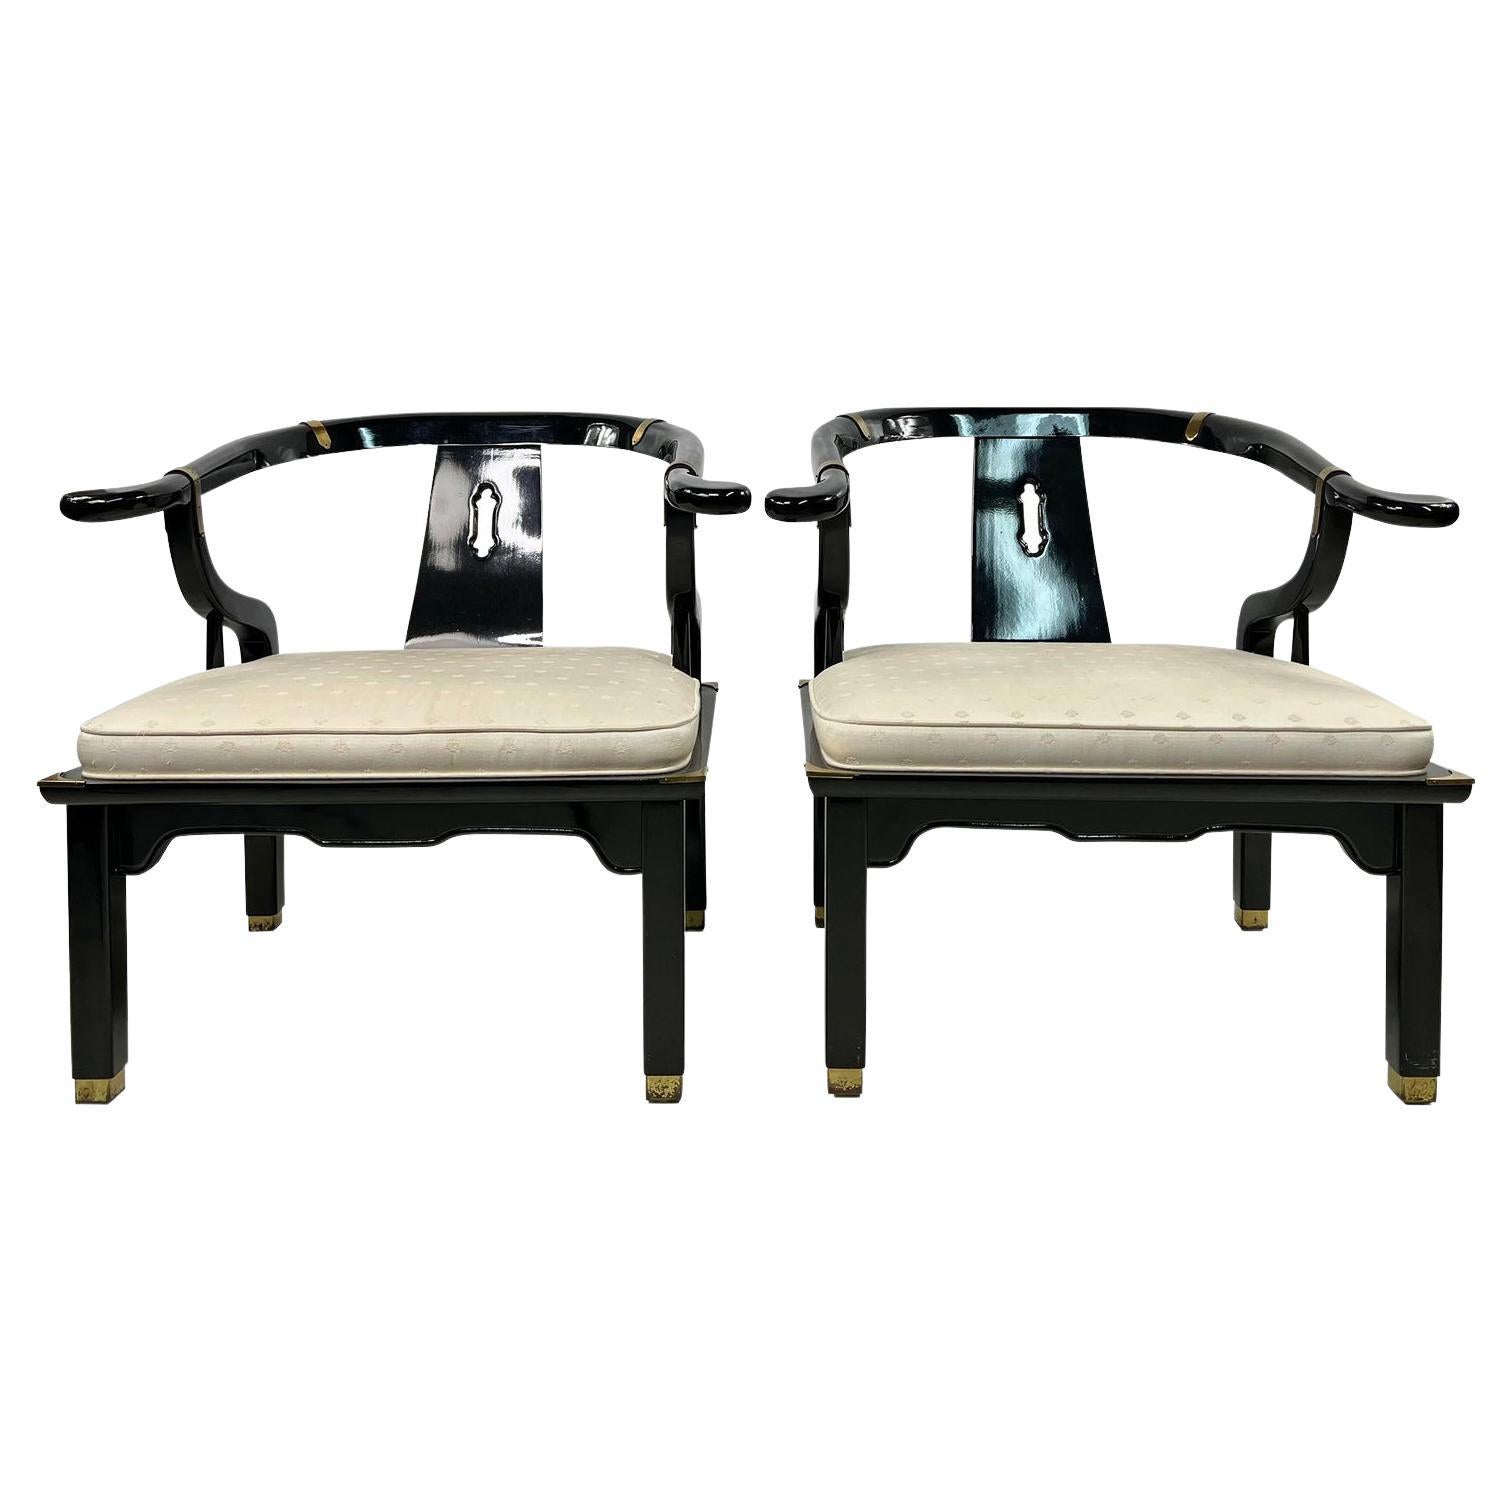 1960s James Mont Style Black Lacquer Asian Modern Chinoiserie Ming Chairs - a Pa For Sale